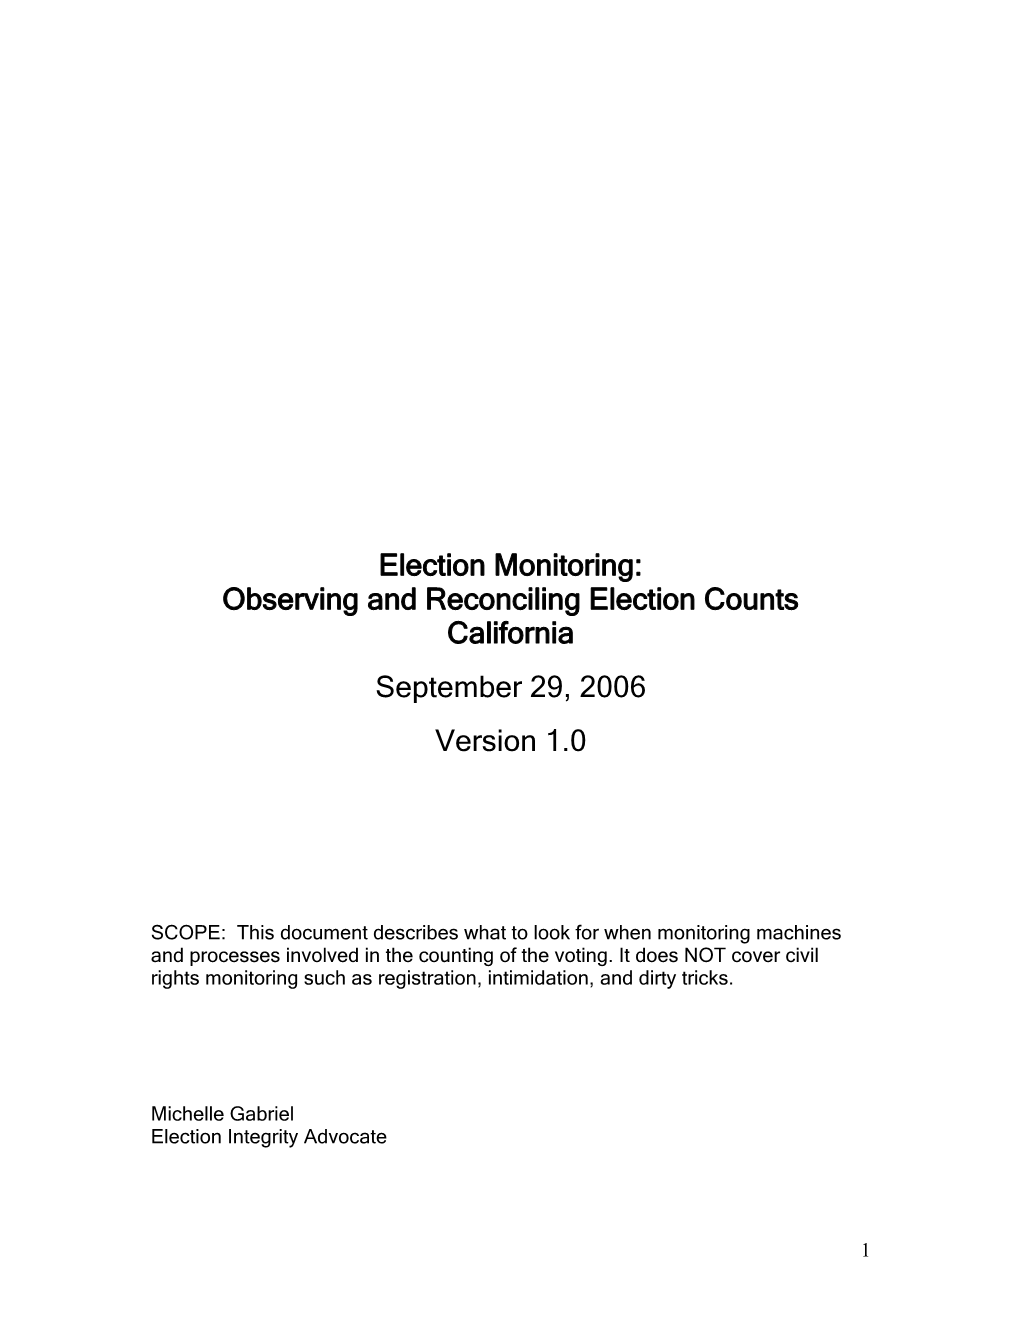 Election Monitoring: Observing and Reconciling Election Counts California